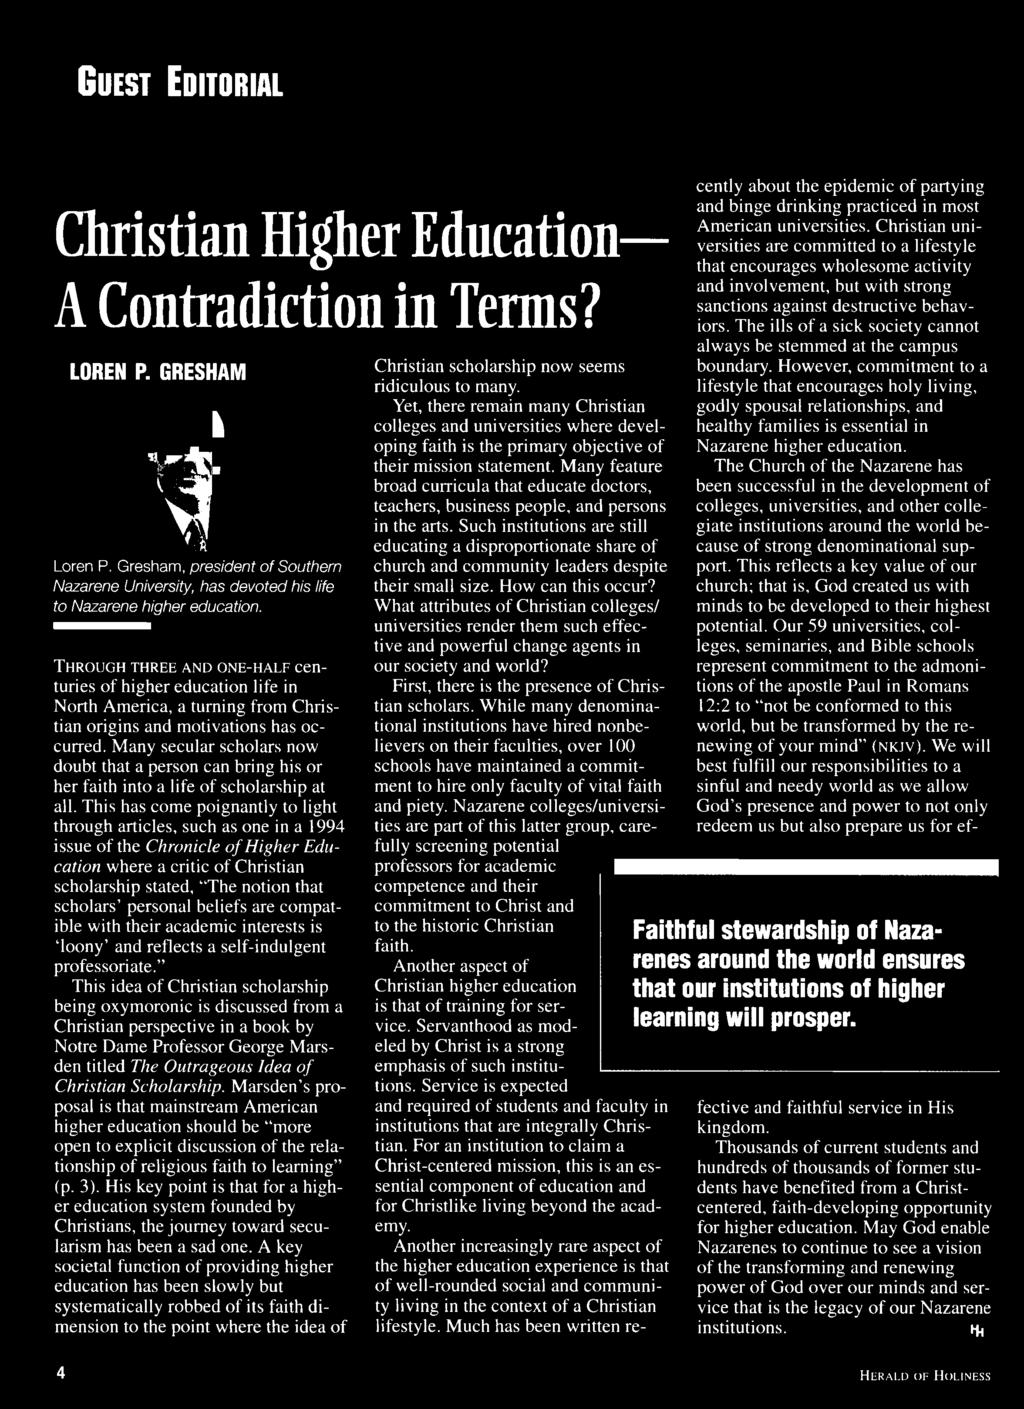 T h r o u g h t h r e e a n d o n e - h a l f centuries of higher education life in North America, a turning from Christian origins and motivations has occurred.